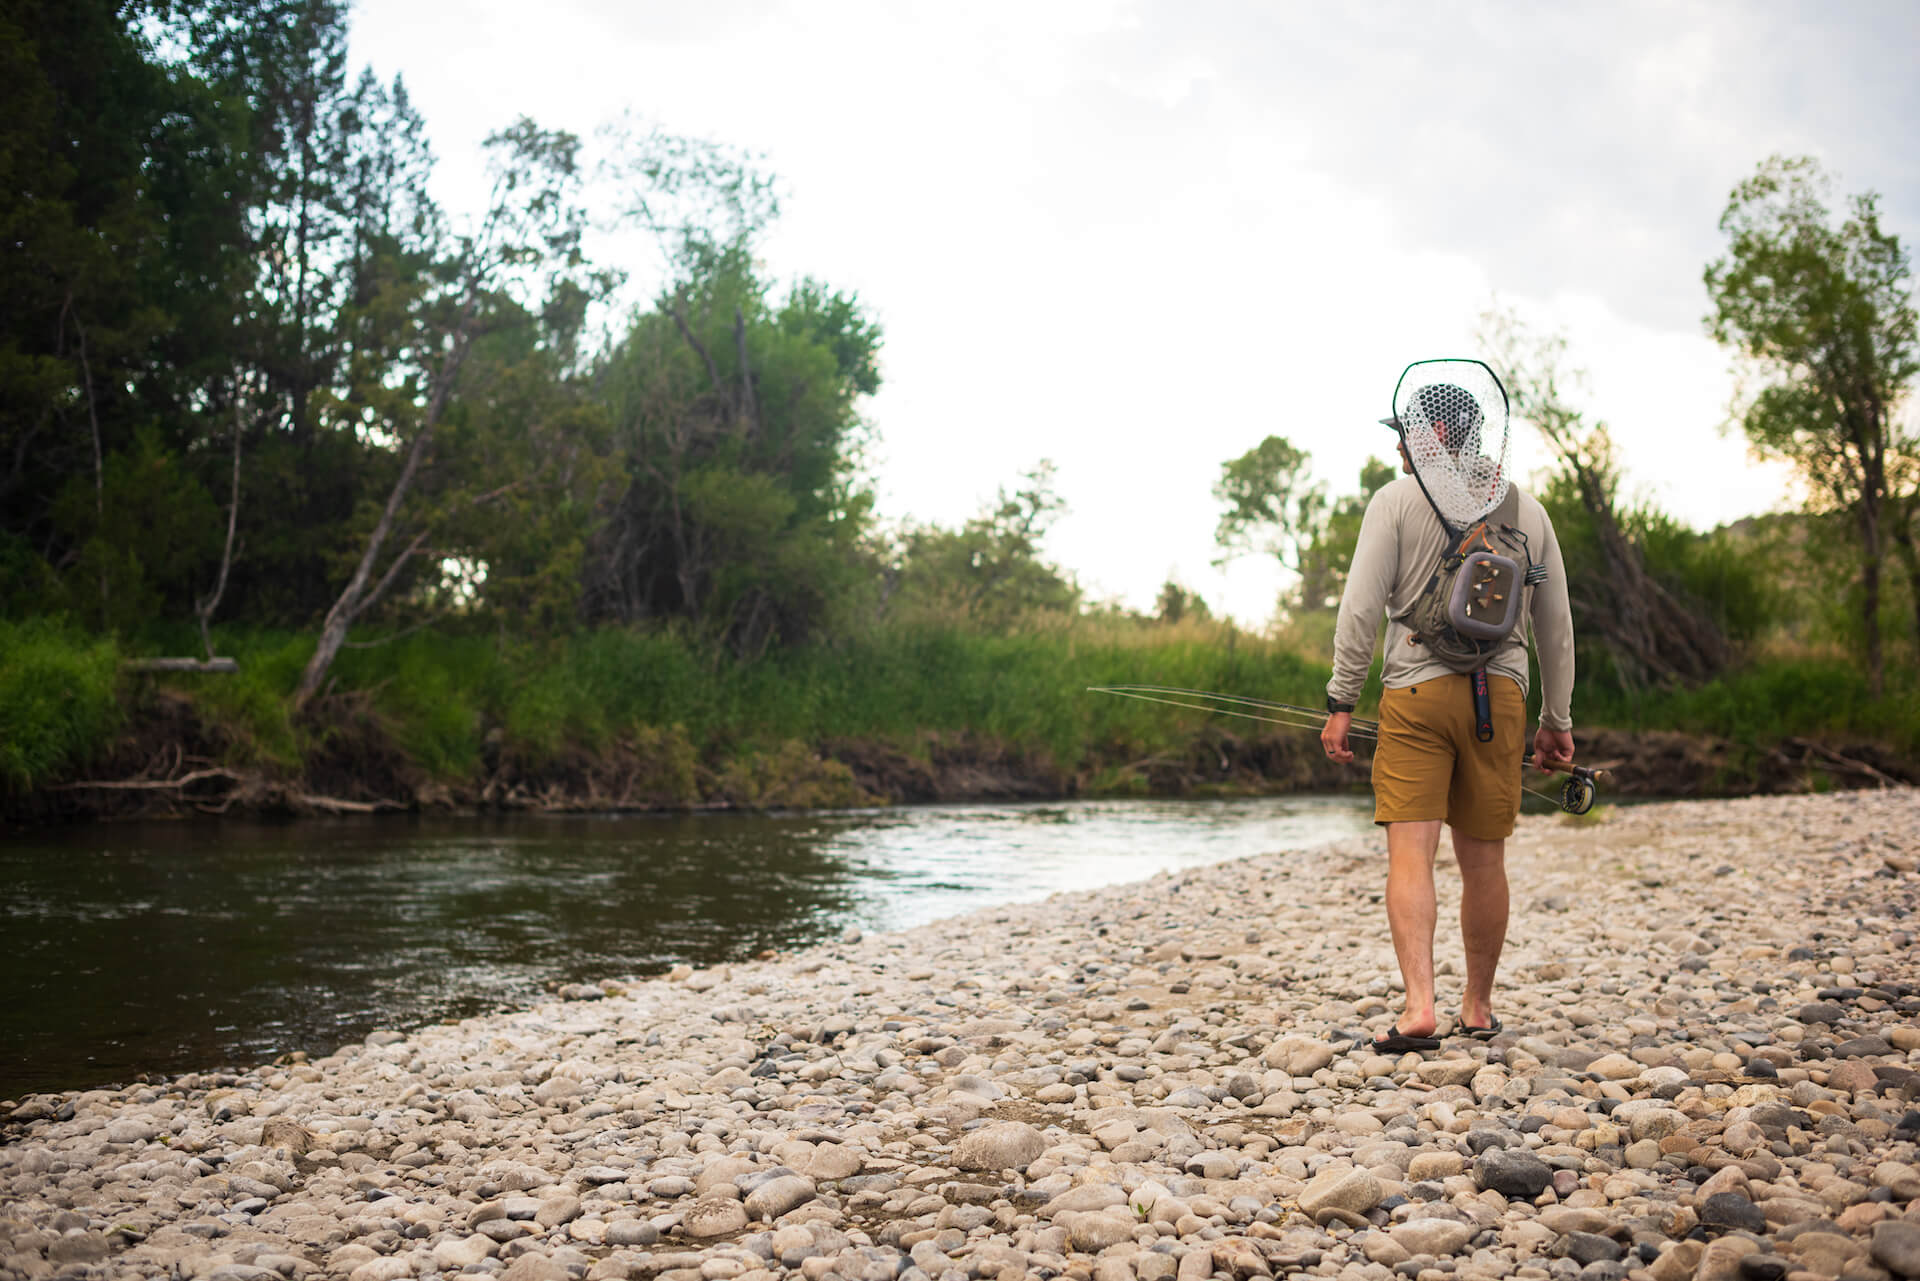 Fly fisherman walking along a river bank: wet wading for beginners guide